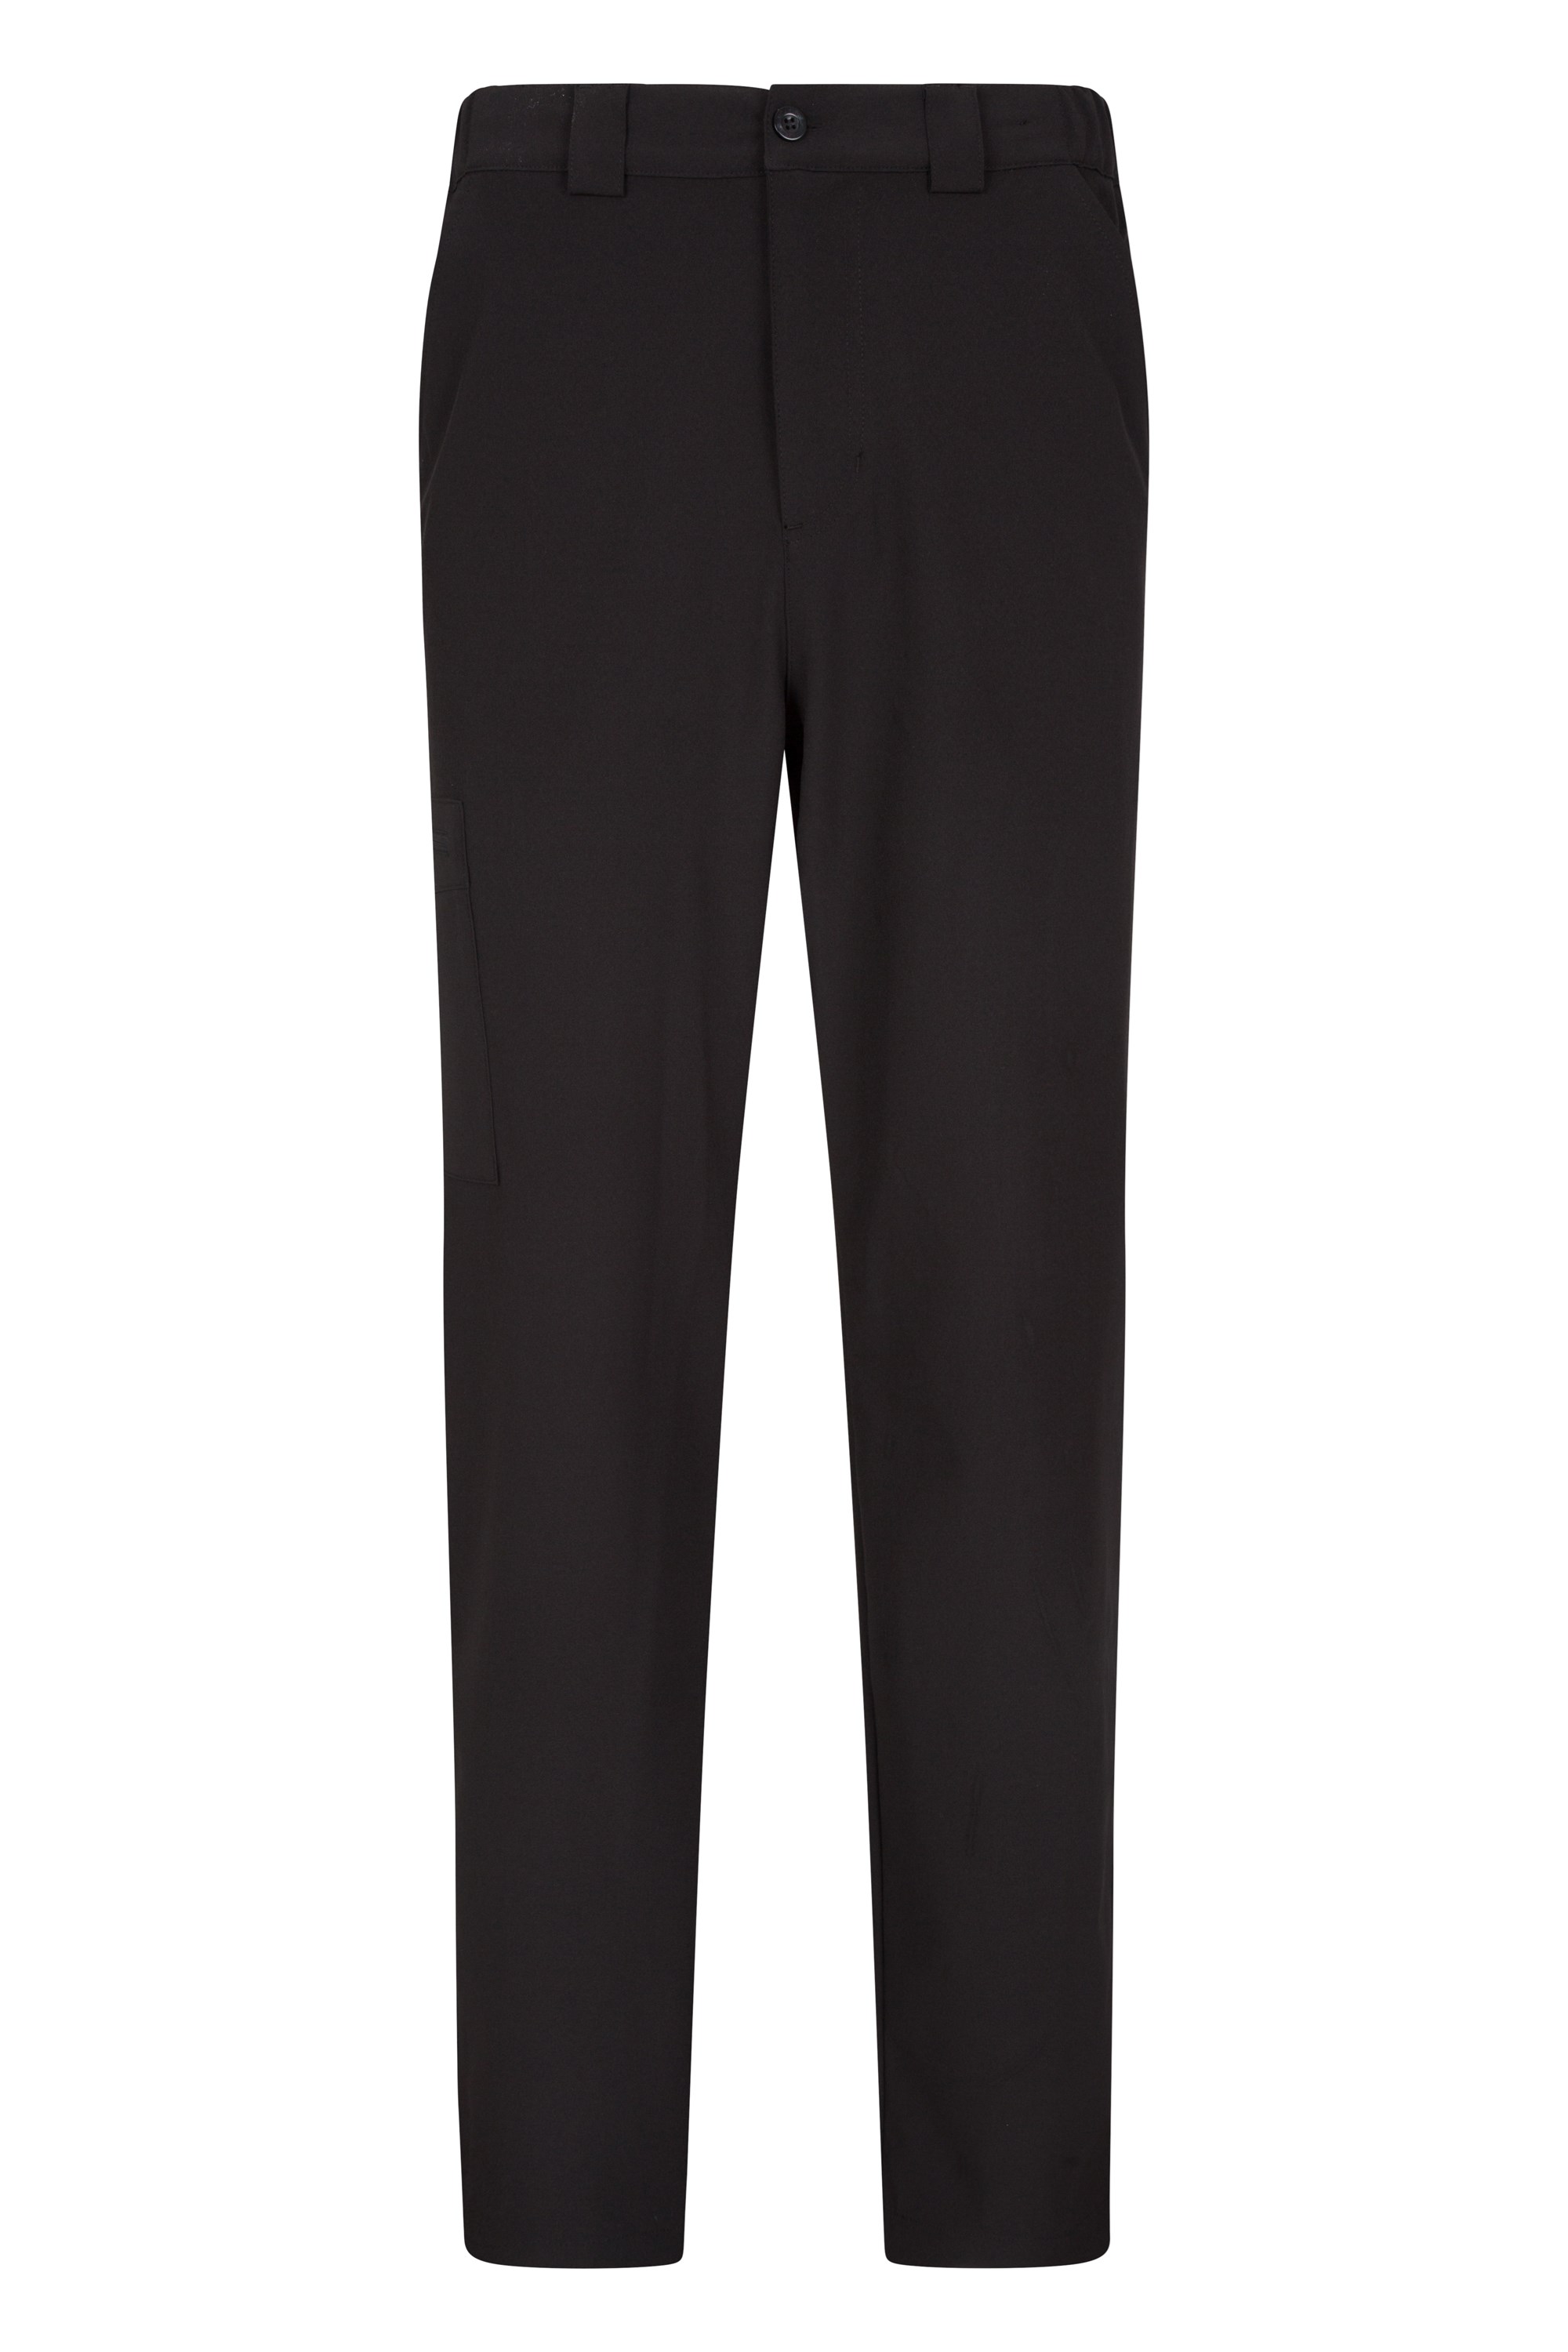 Stride Mens Stretch Pants | Mountain Warehouse CA